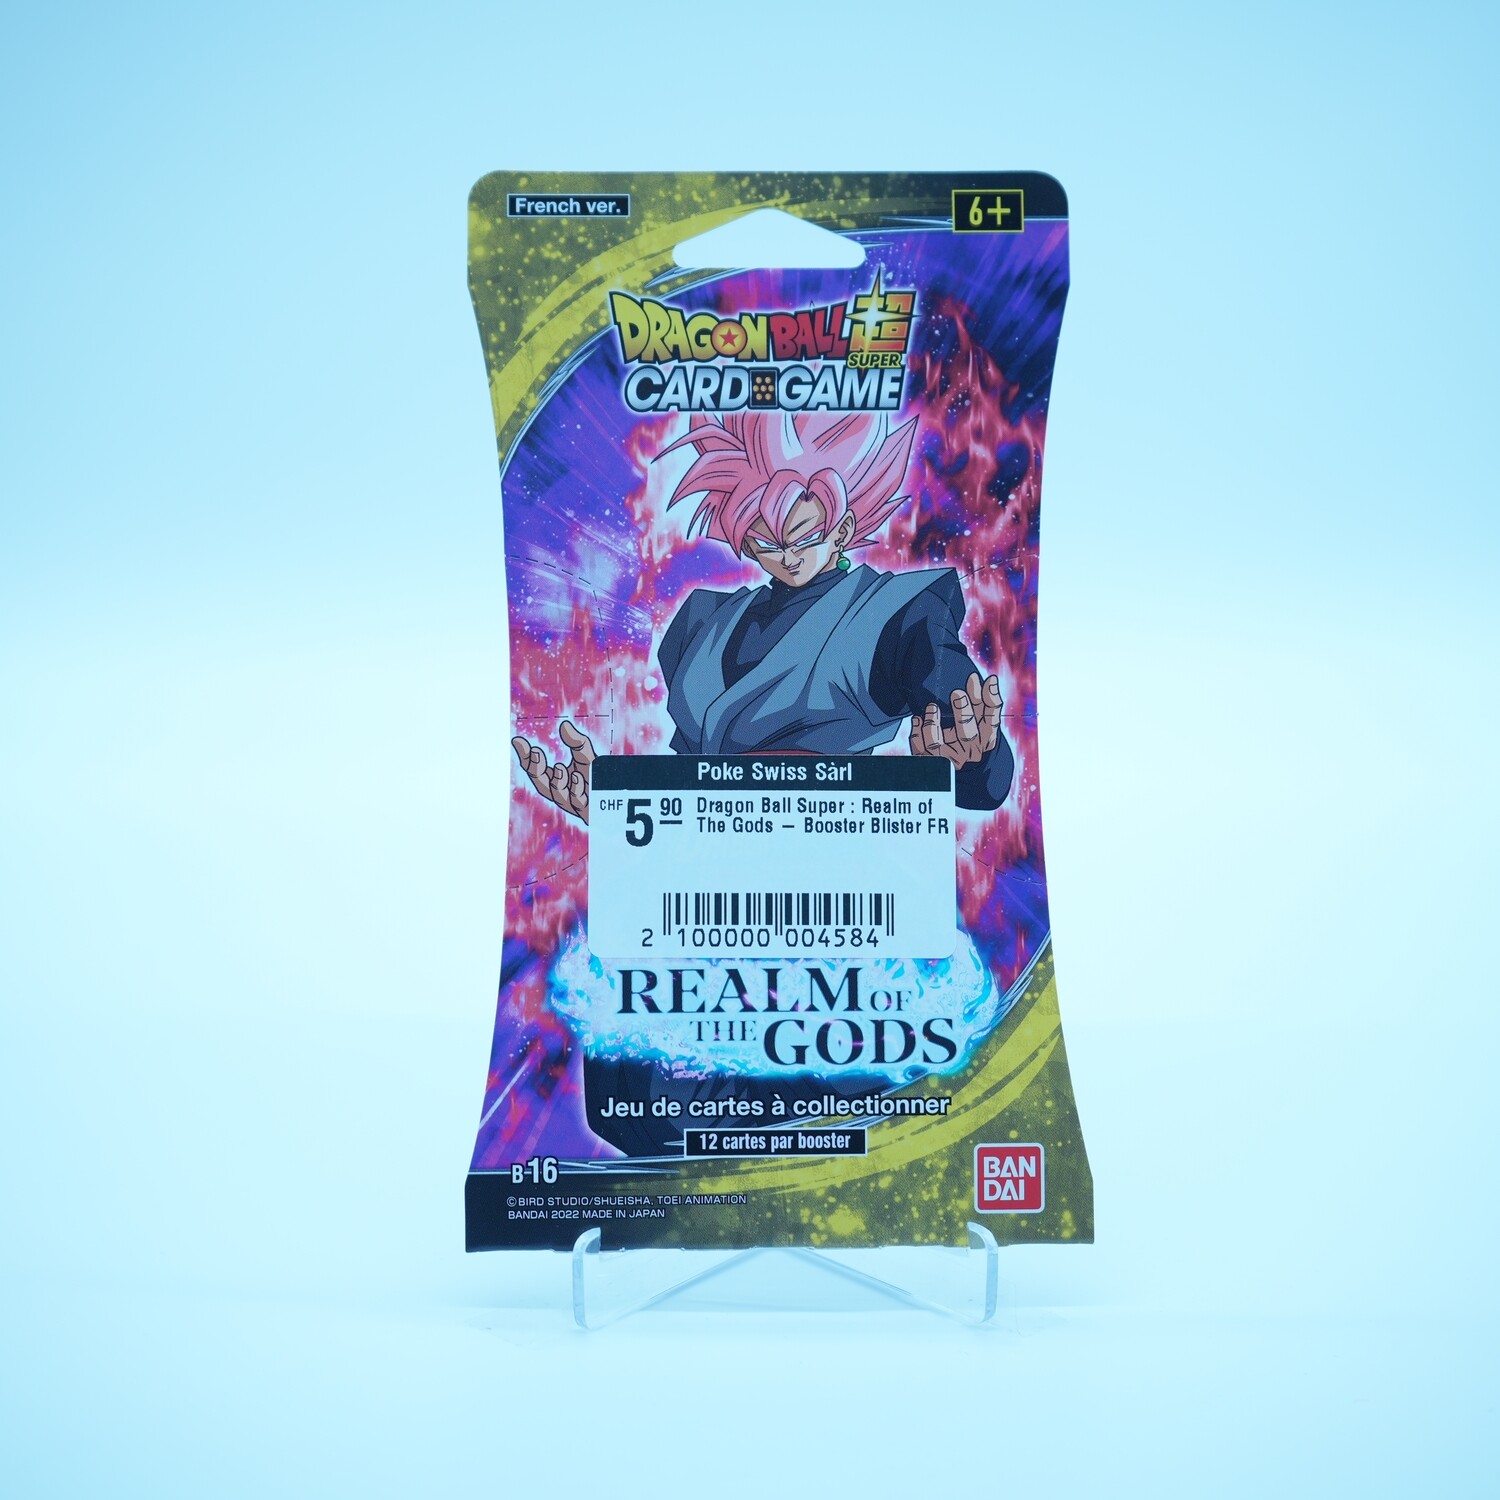 The Realm Of Gods Booster Blister FR